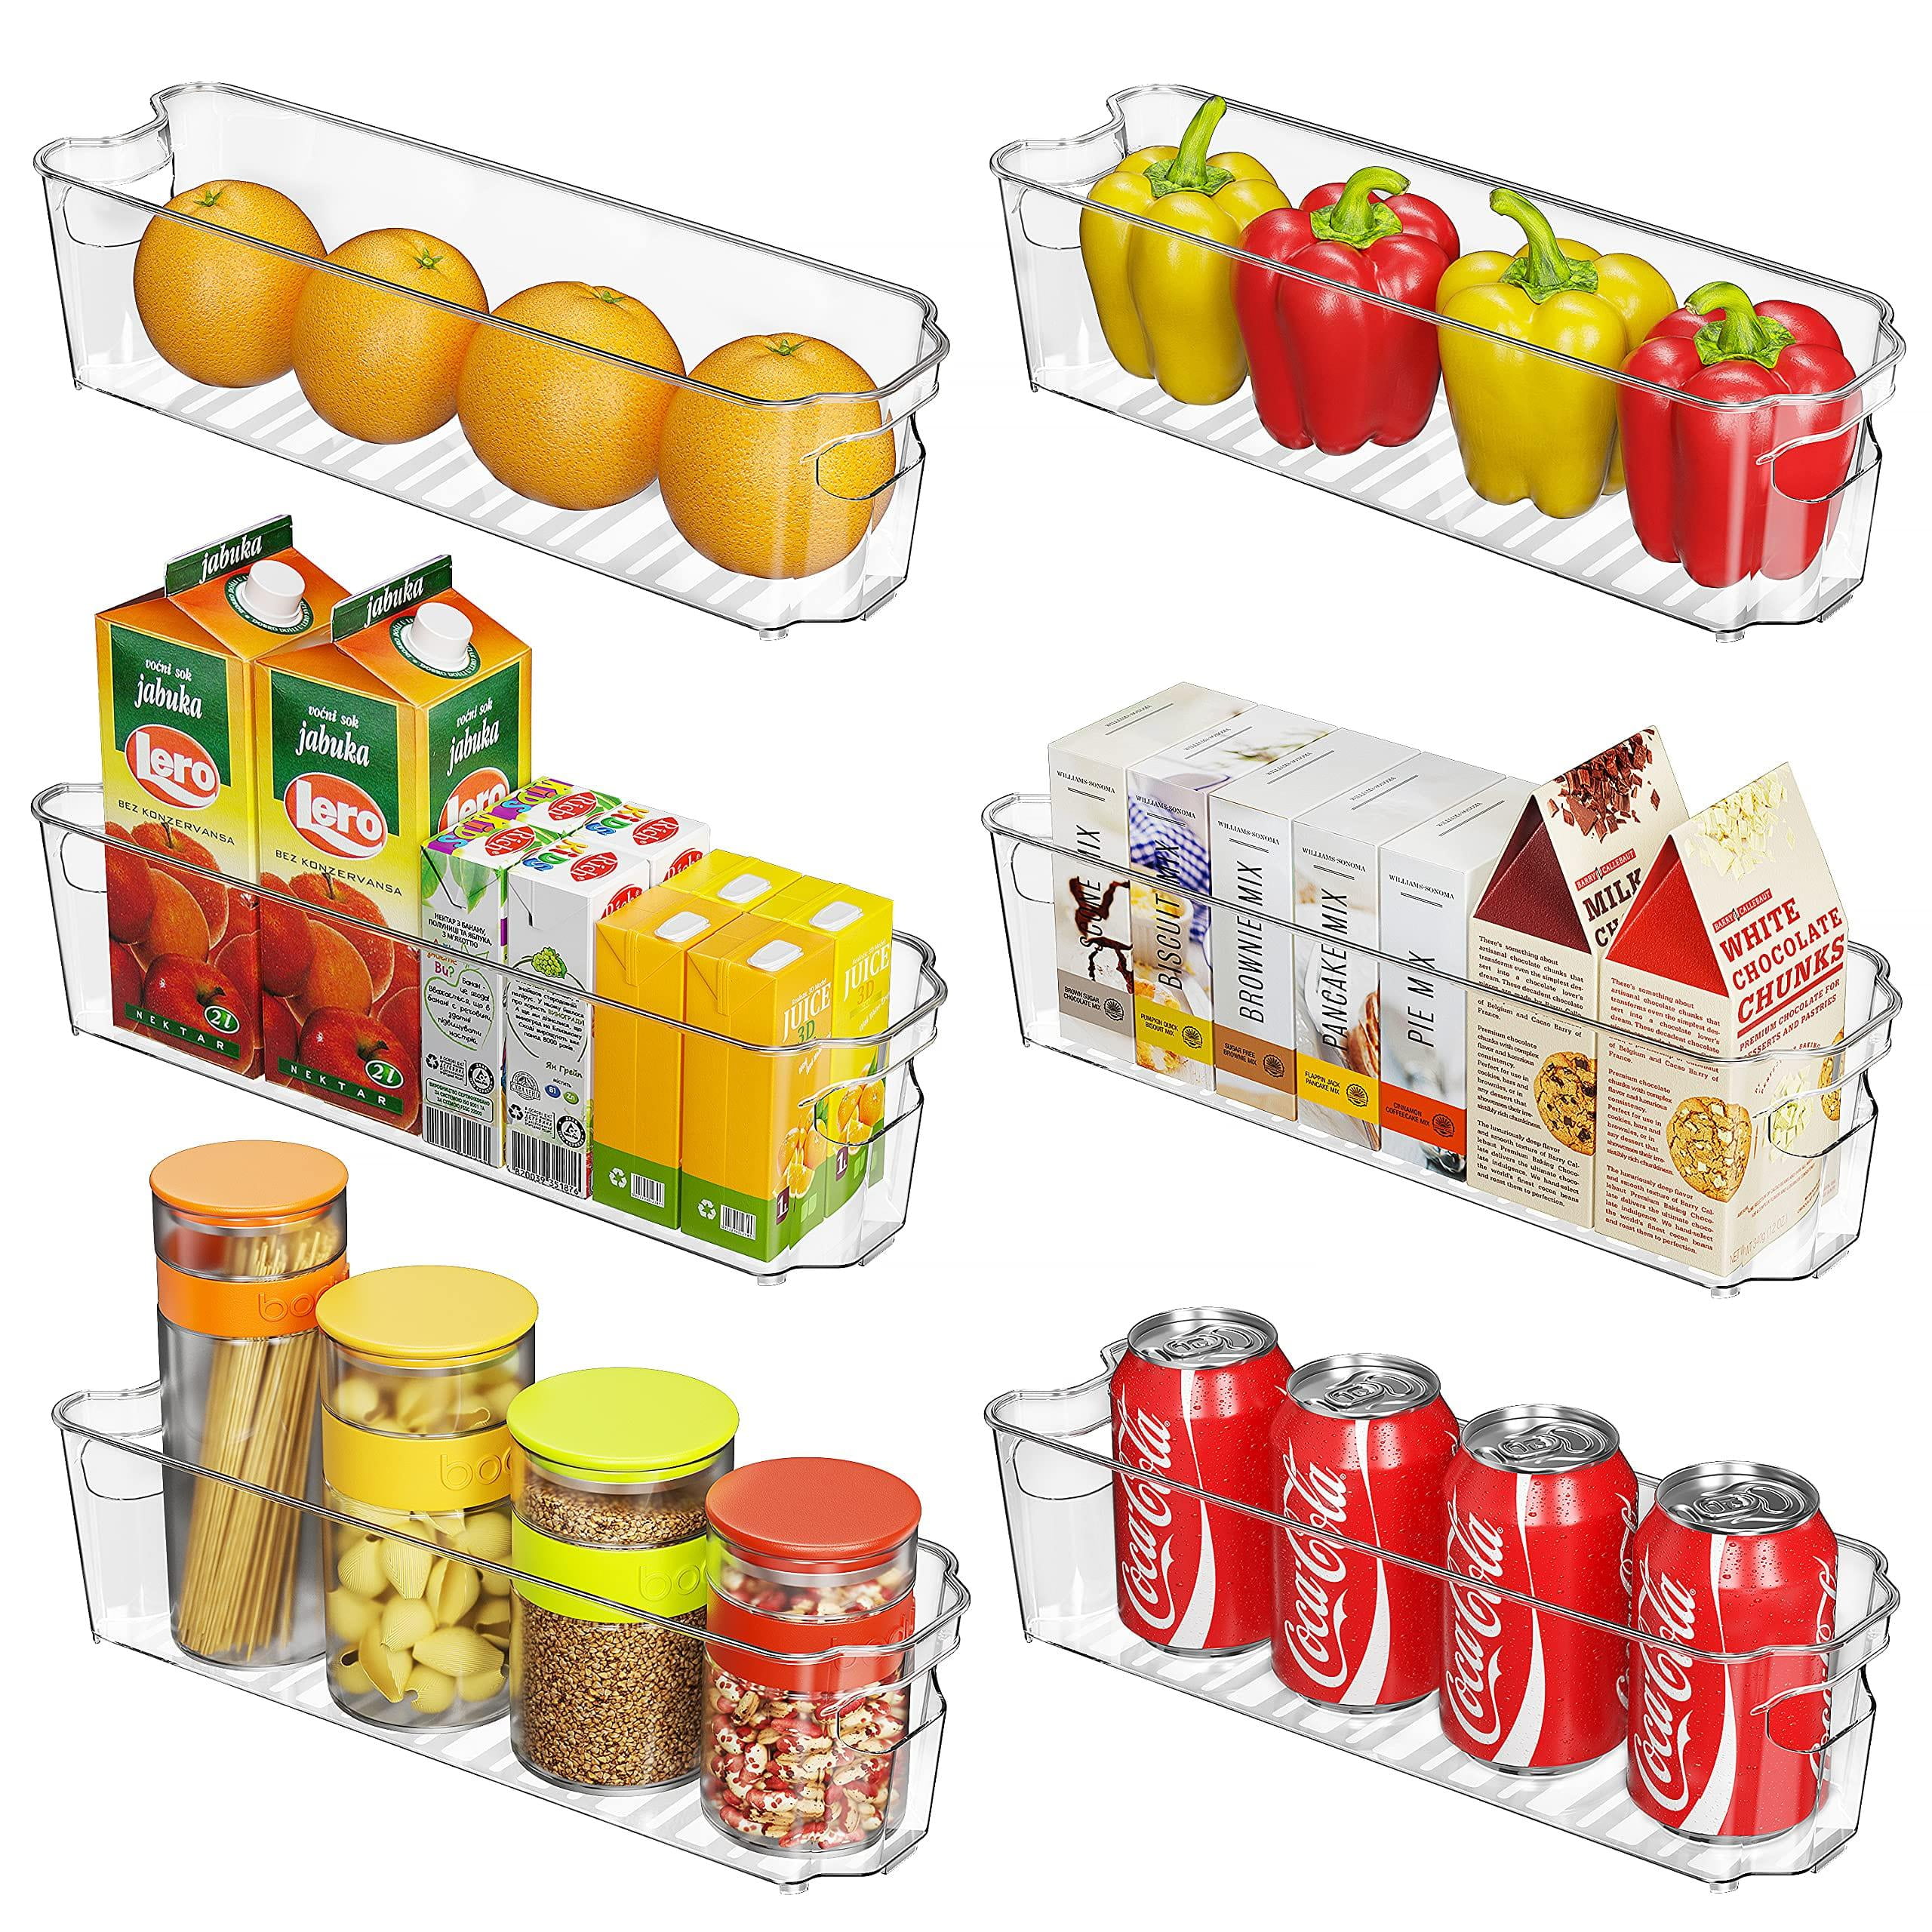 YekouMax Pantry Organization and Storage Bins, Refrigerator Organizer, Plastic Stackable Storage Bins with Drawers, Pull-Out Cabinet Containers for